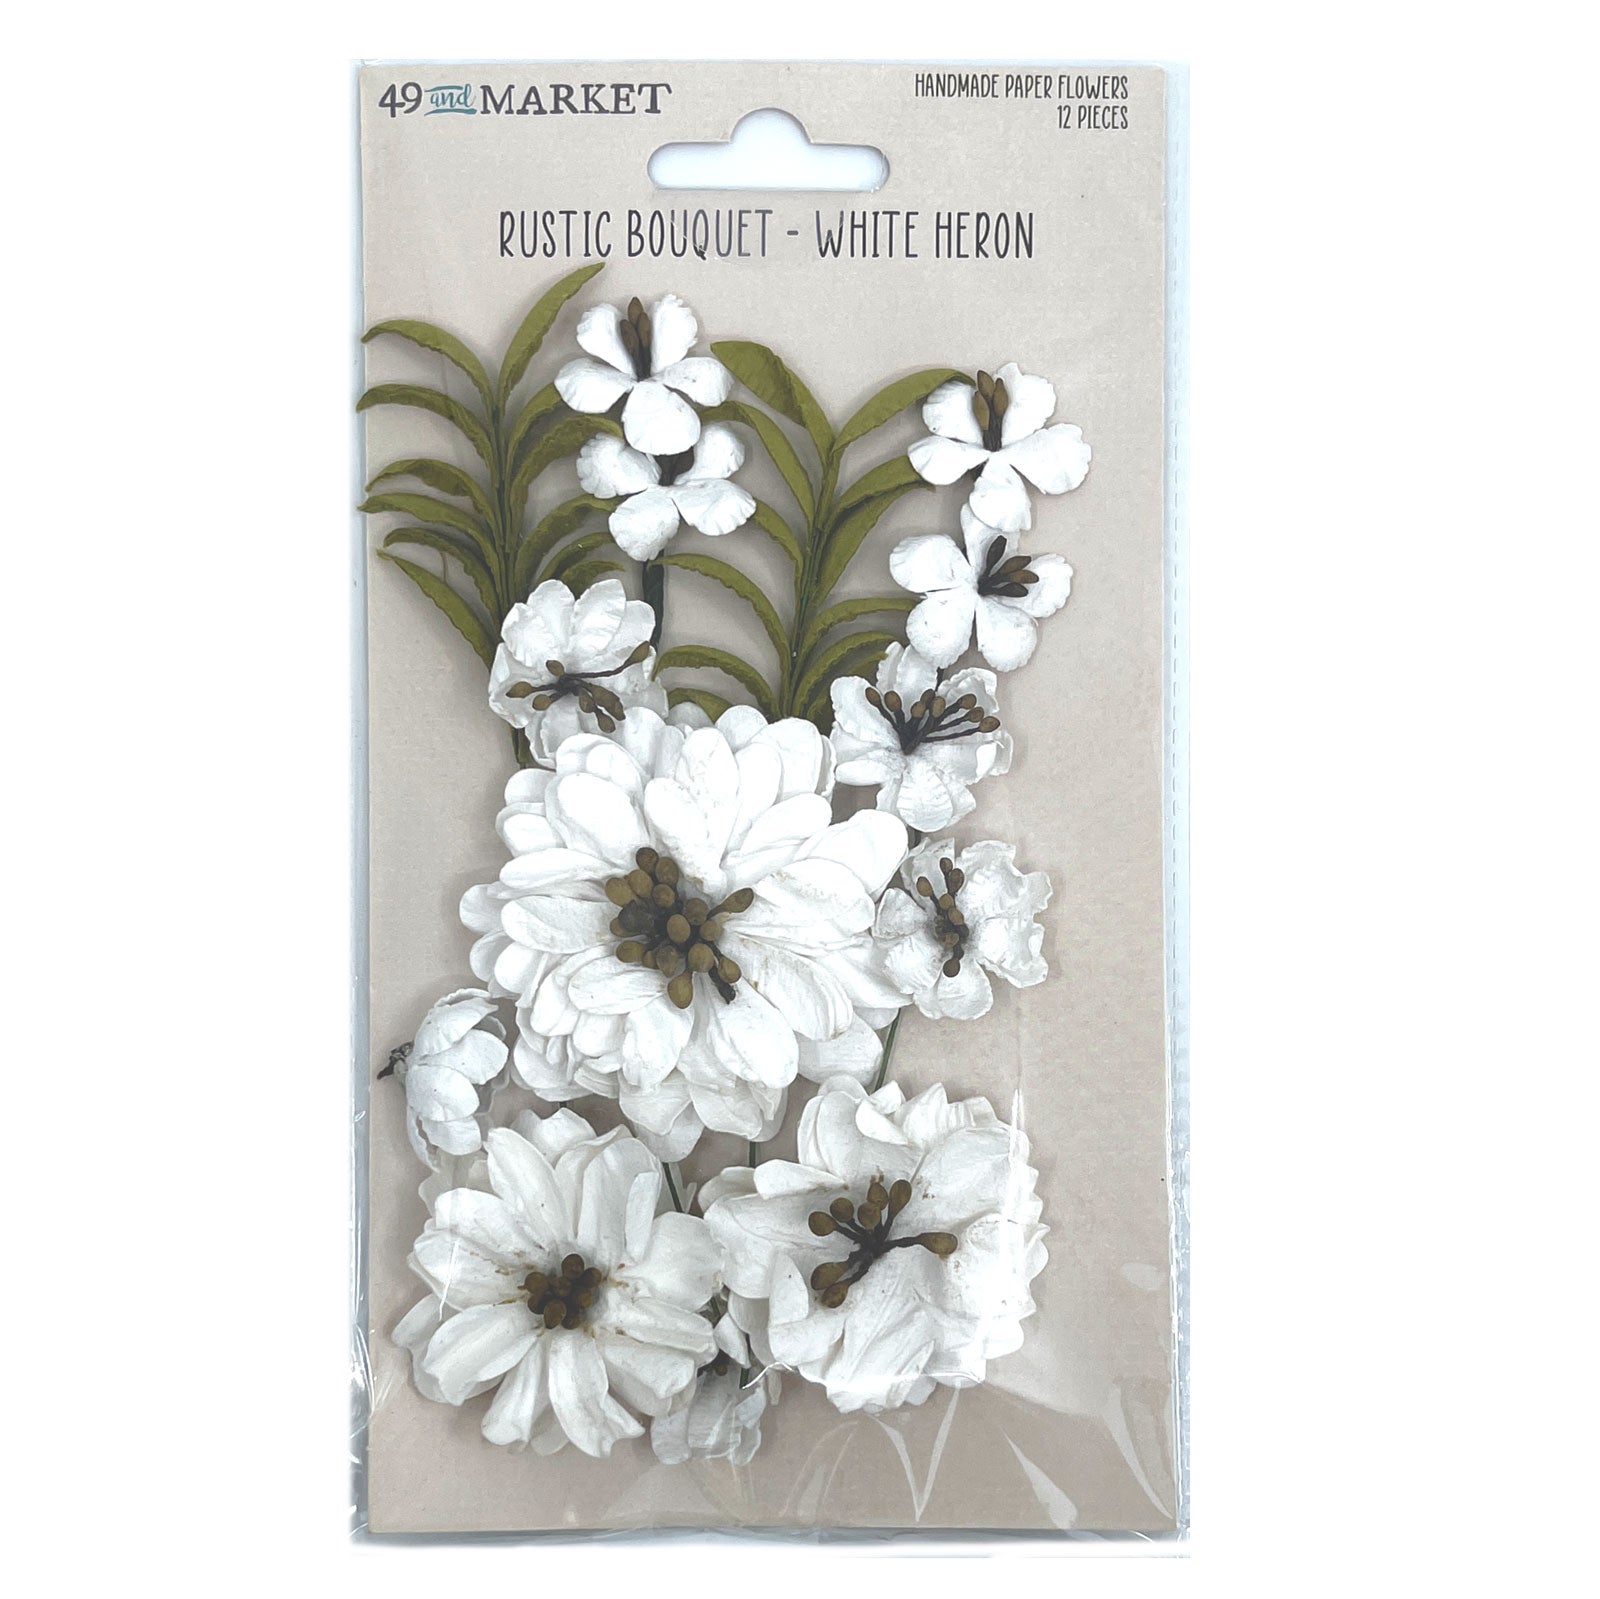 49 and Market Flowers - Rustic Bouquet - white